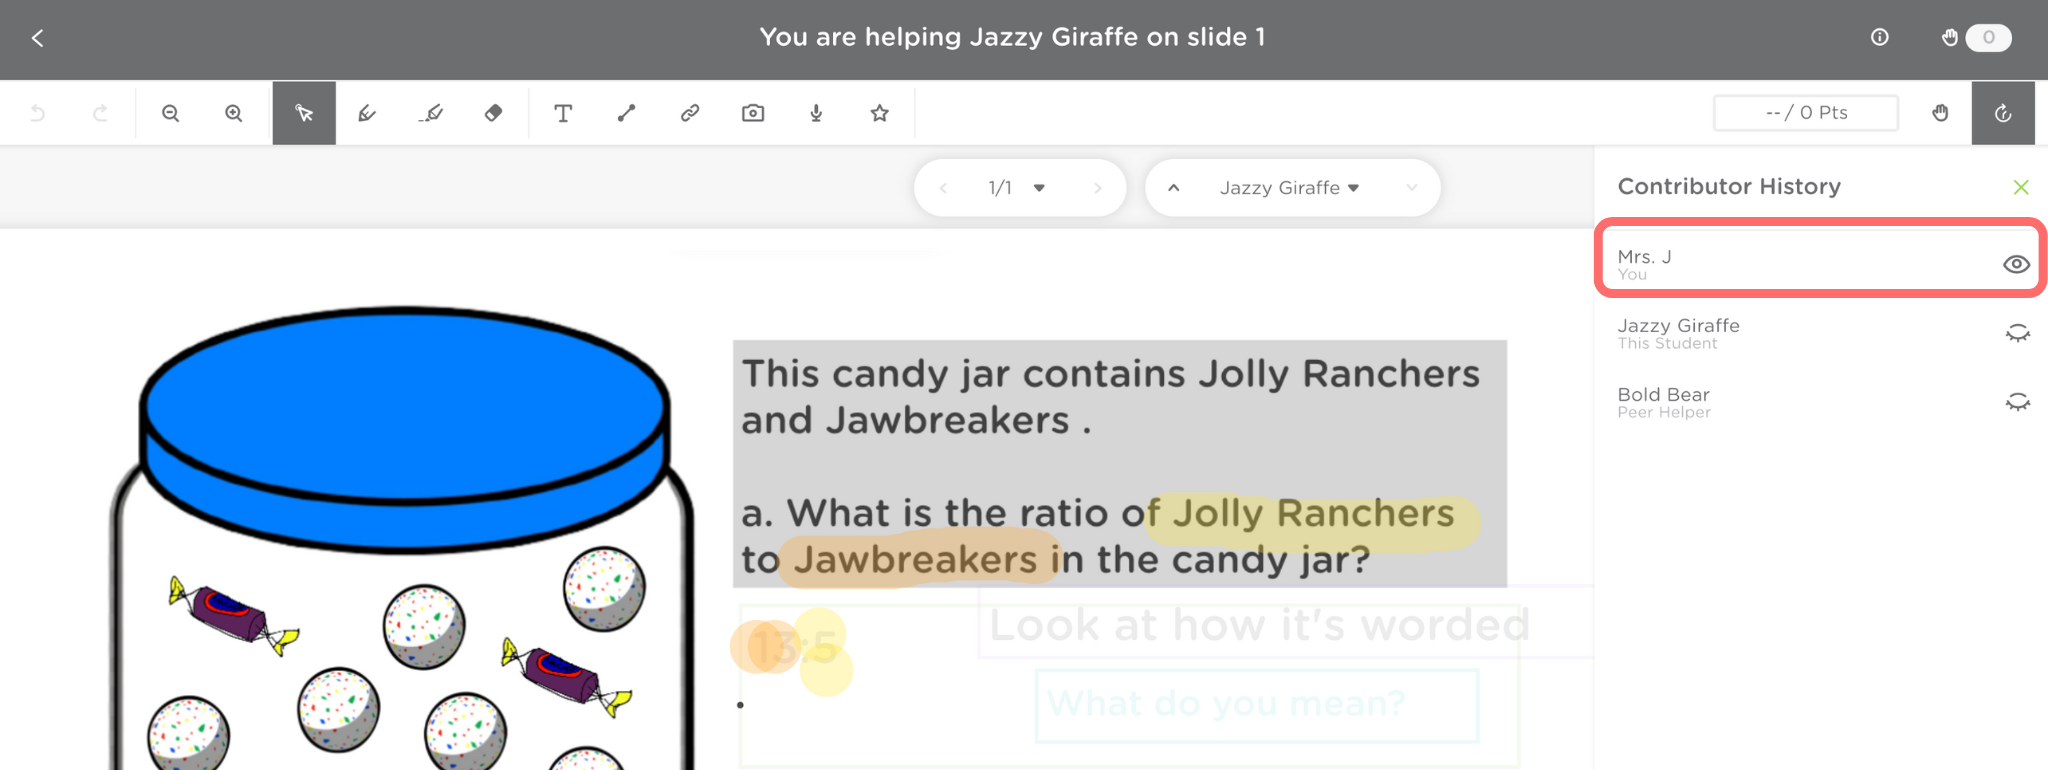 Mrs. J is selected and only her feedback is shown. She highlighted Jolly Ranches in yellow and Jawbreakers in orange.